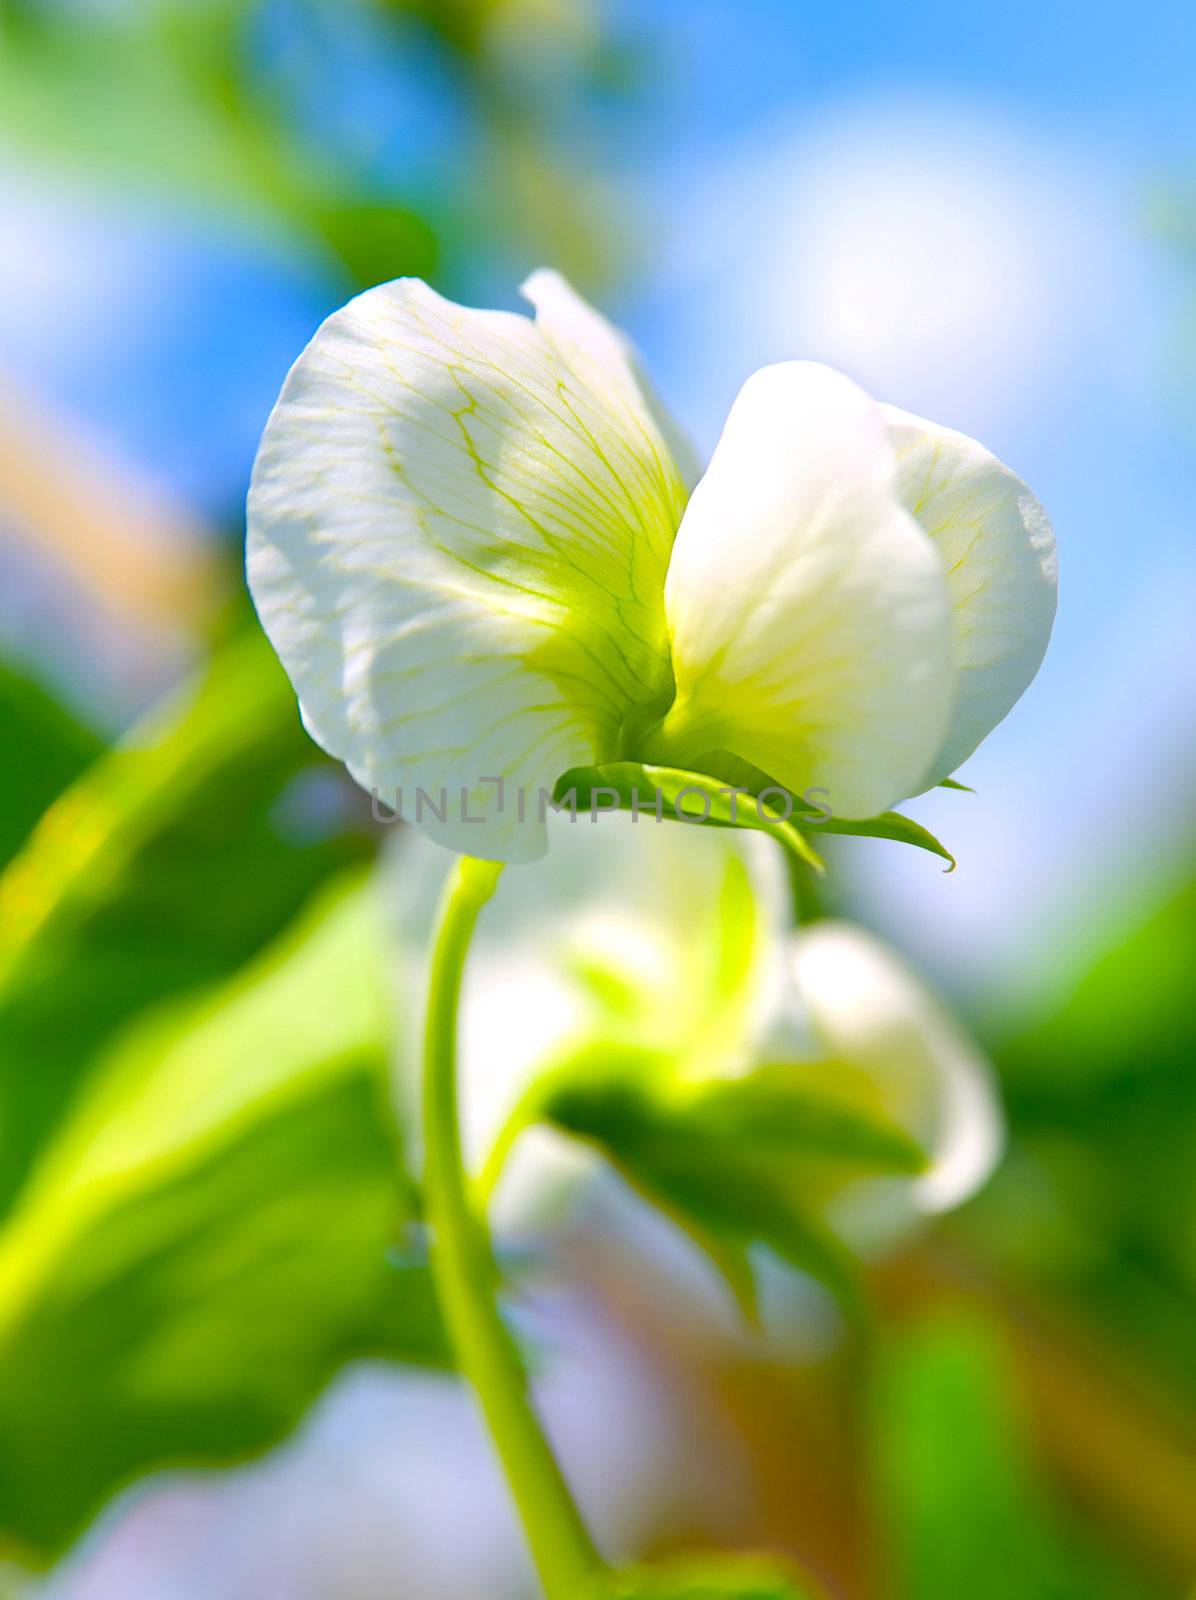 Pea plant with white blooms. by motorolka